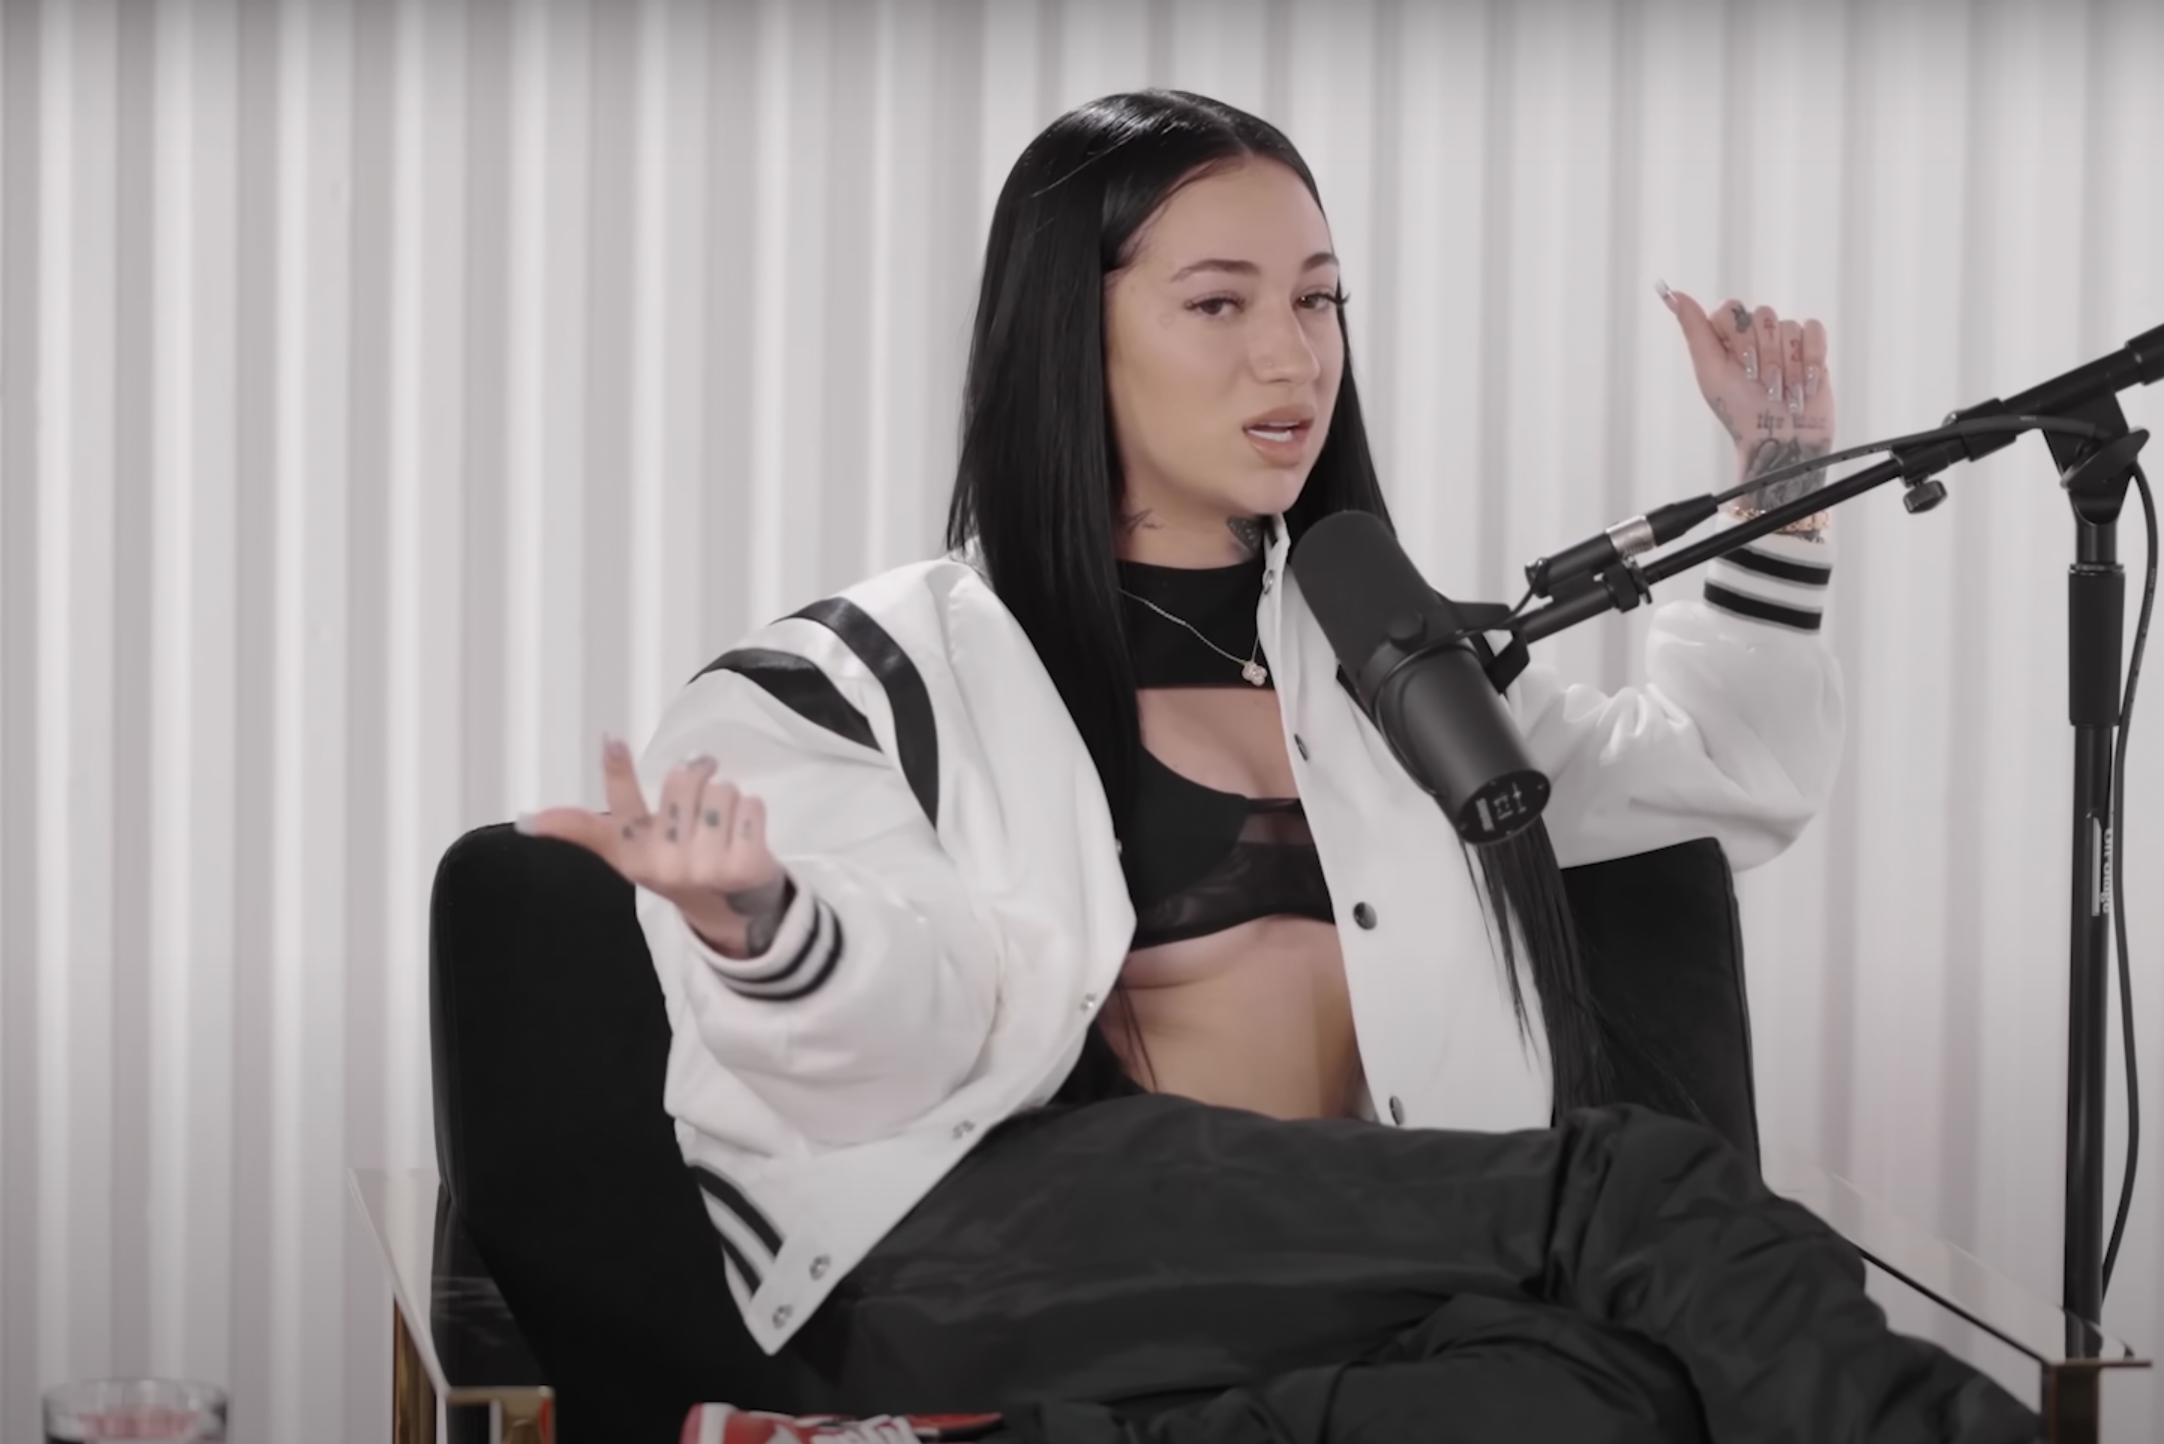 Bhad Bhabie Shares OnlyFans Payslip to Show How Much Creators Get Paid